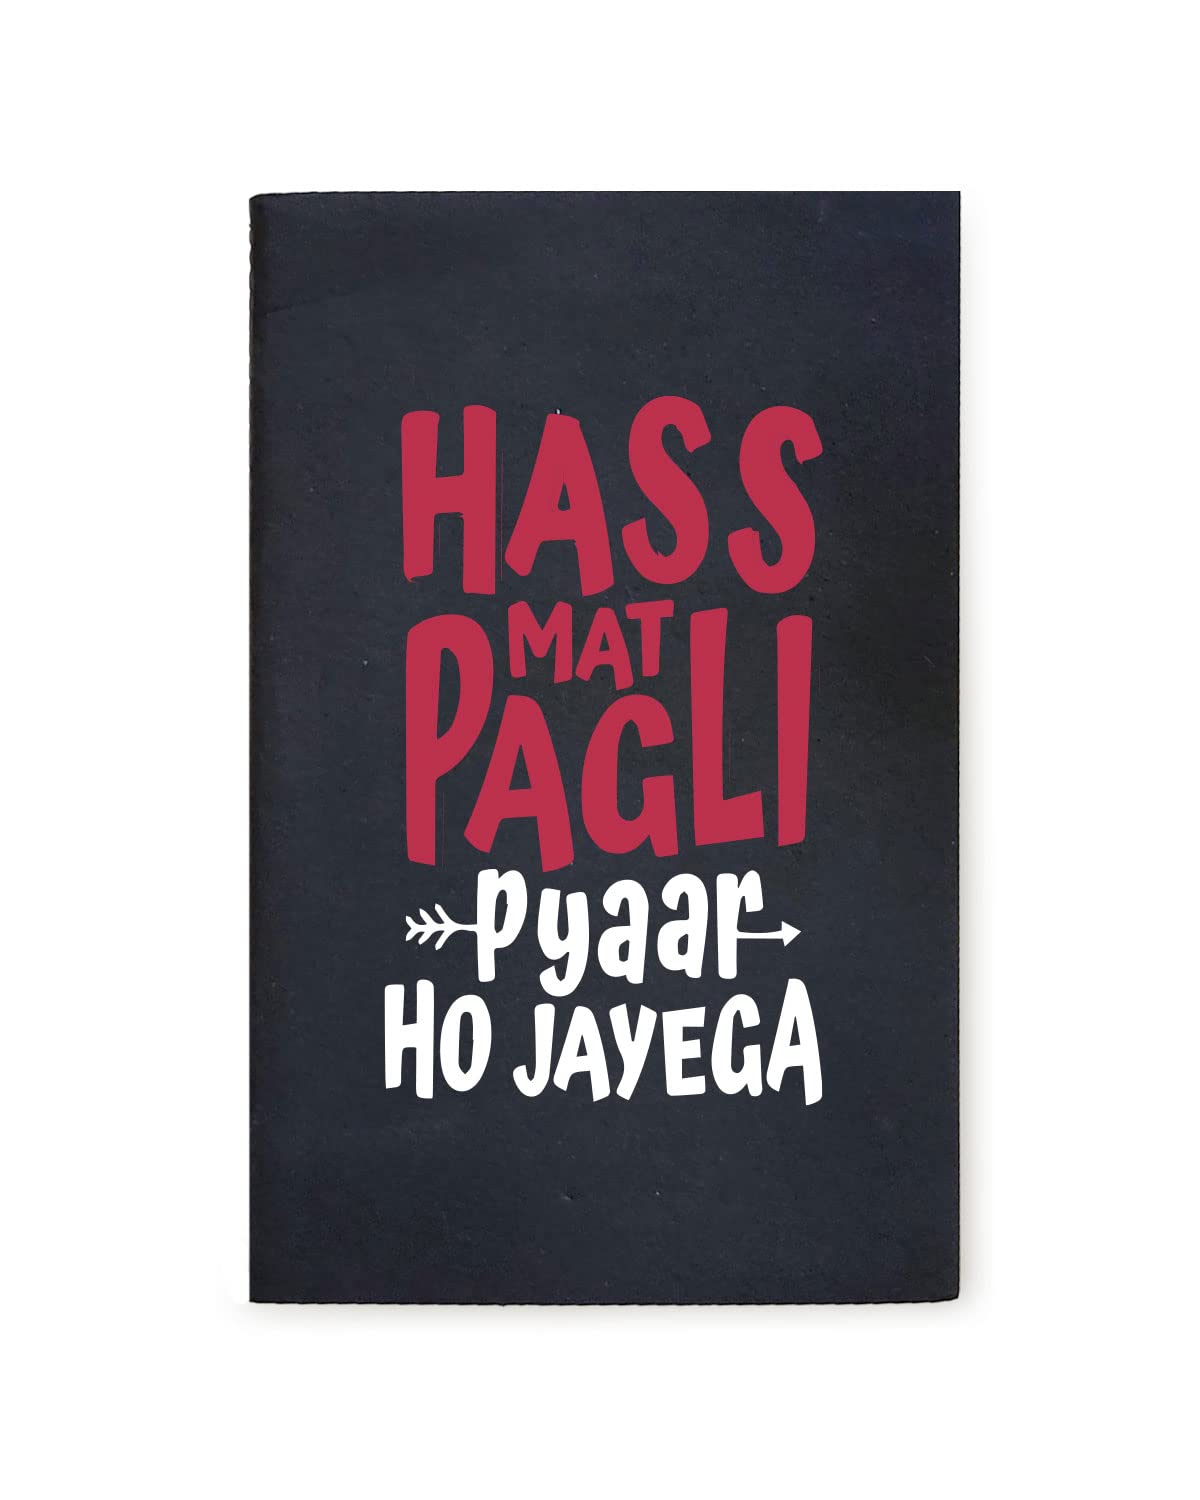 Hass Mat Pagli - Black A5 Doodle Notebook - Kraft Cover Notebook - A5 - 300 GSM Kraft Cover - Handmade - Unruled - 80 Pages - Natural Shade Pages 120 GSM - Funny Quotes & Quirky, Funky designs